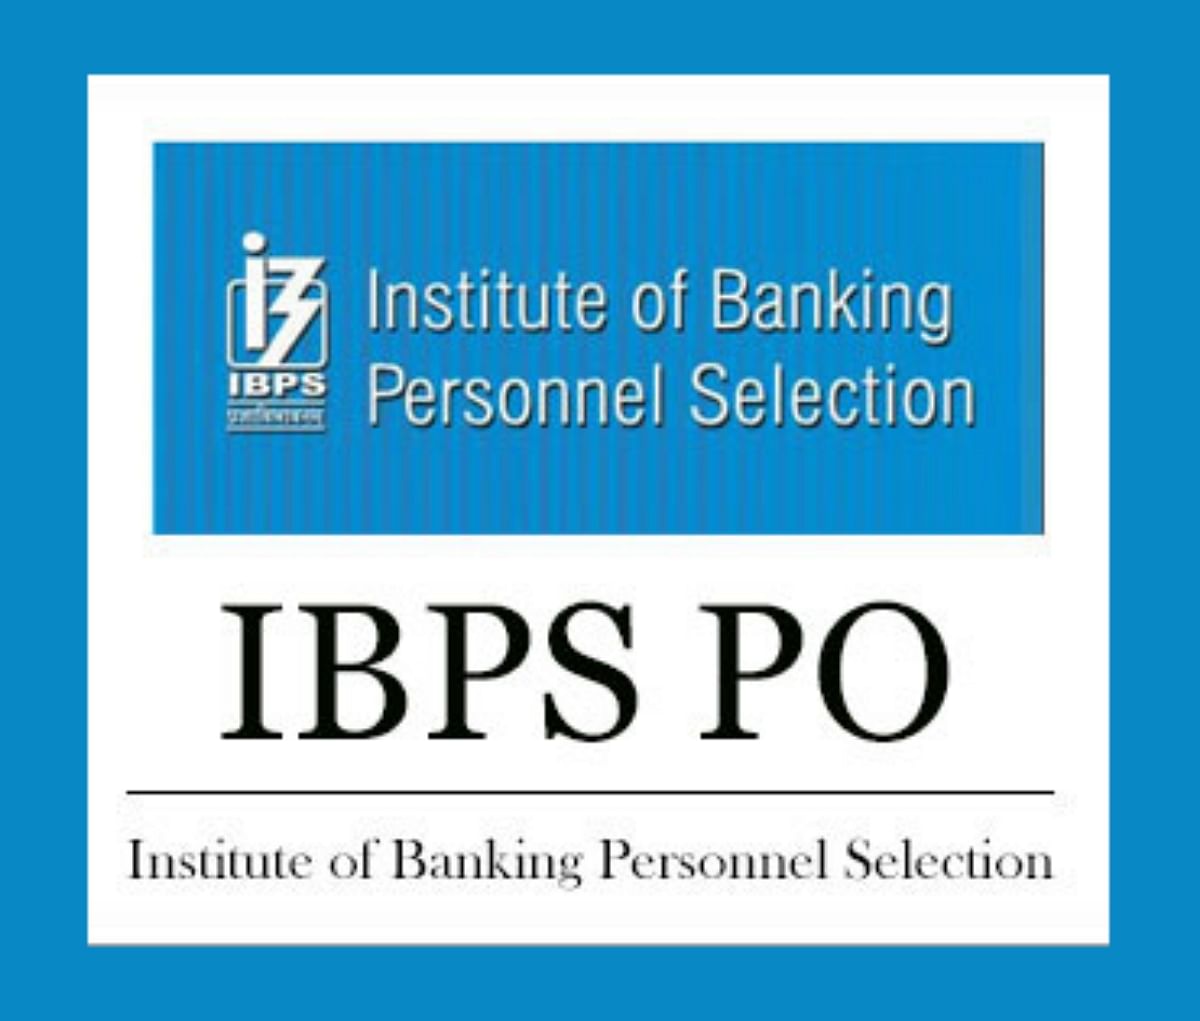 IBPS PO Mains 2021 Scorecard Released, Check Direct Link Here